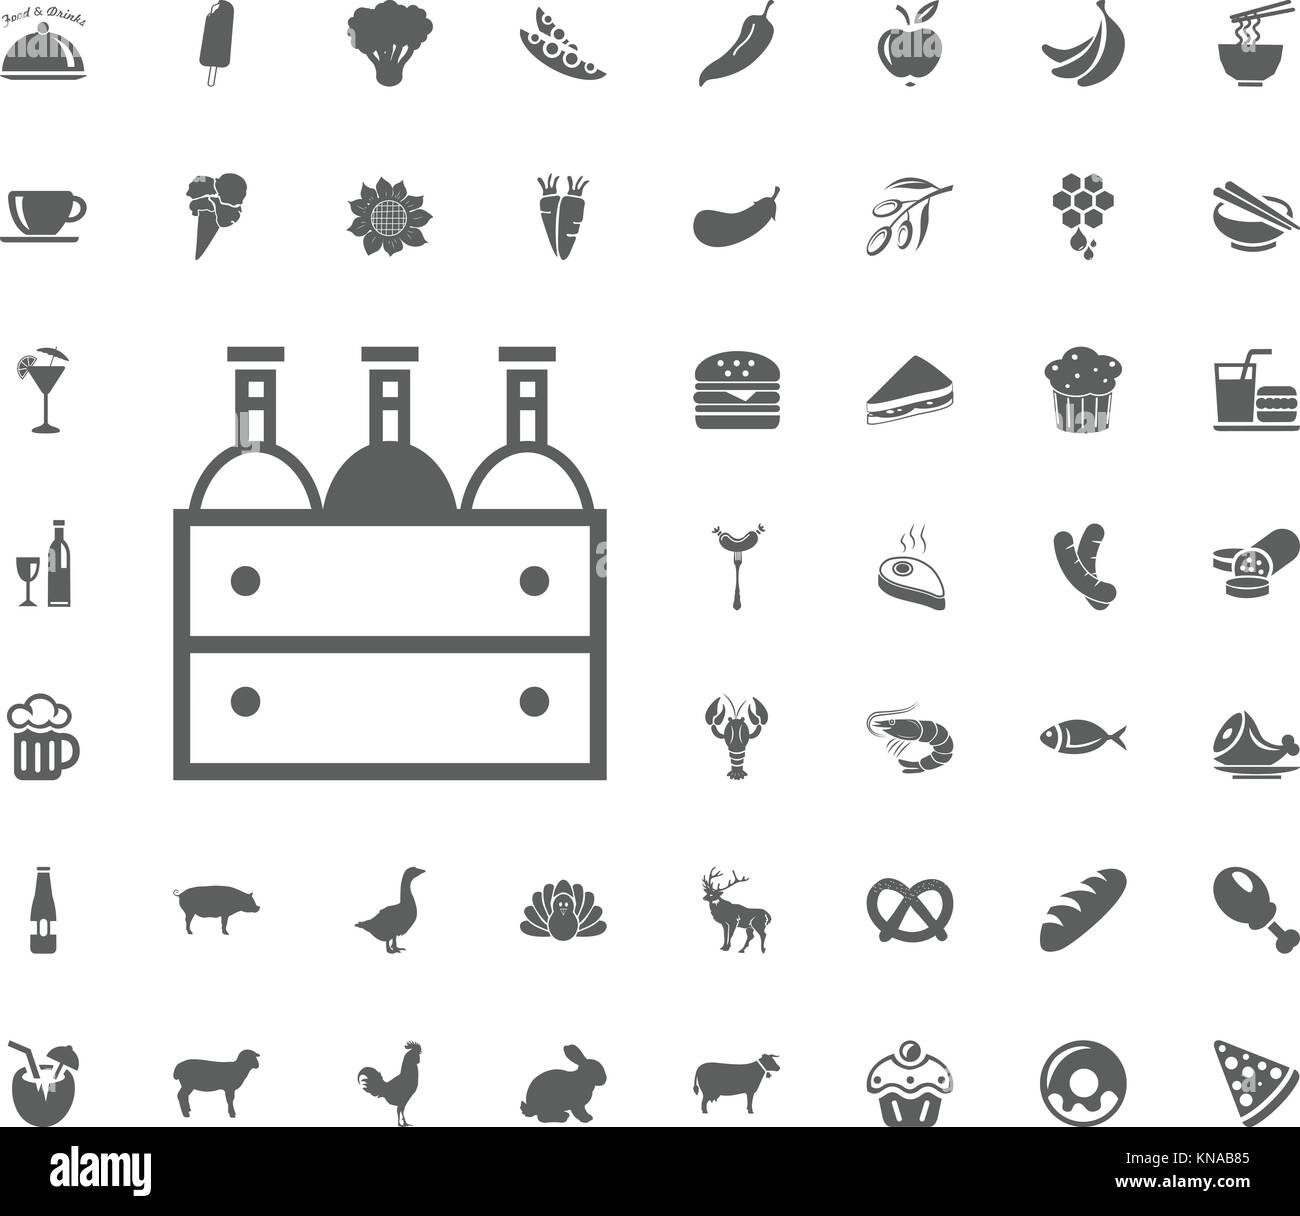 Box of wine icon. Food and Drinks vector icon set. Stock Vector